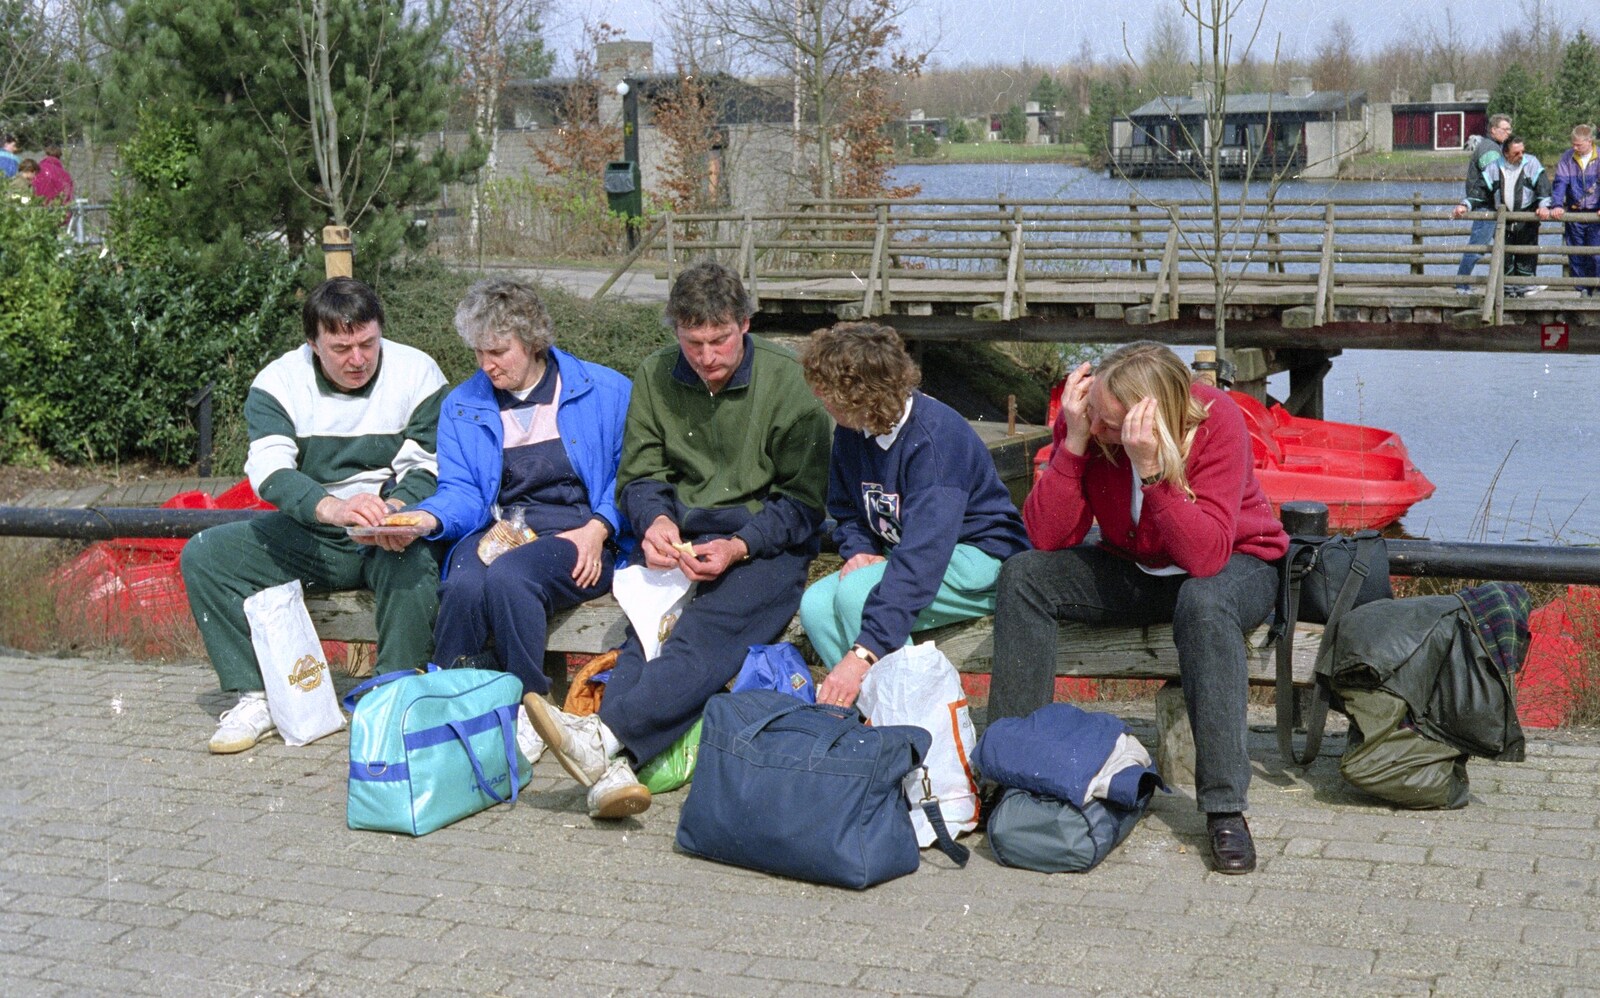 A Trip to Center Parcs, Eemhof, Netherlands - 24th March 1992: A picnic lunch on the last day